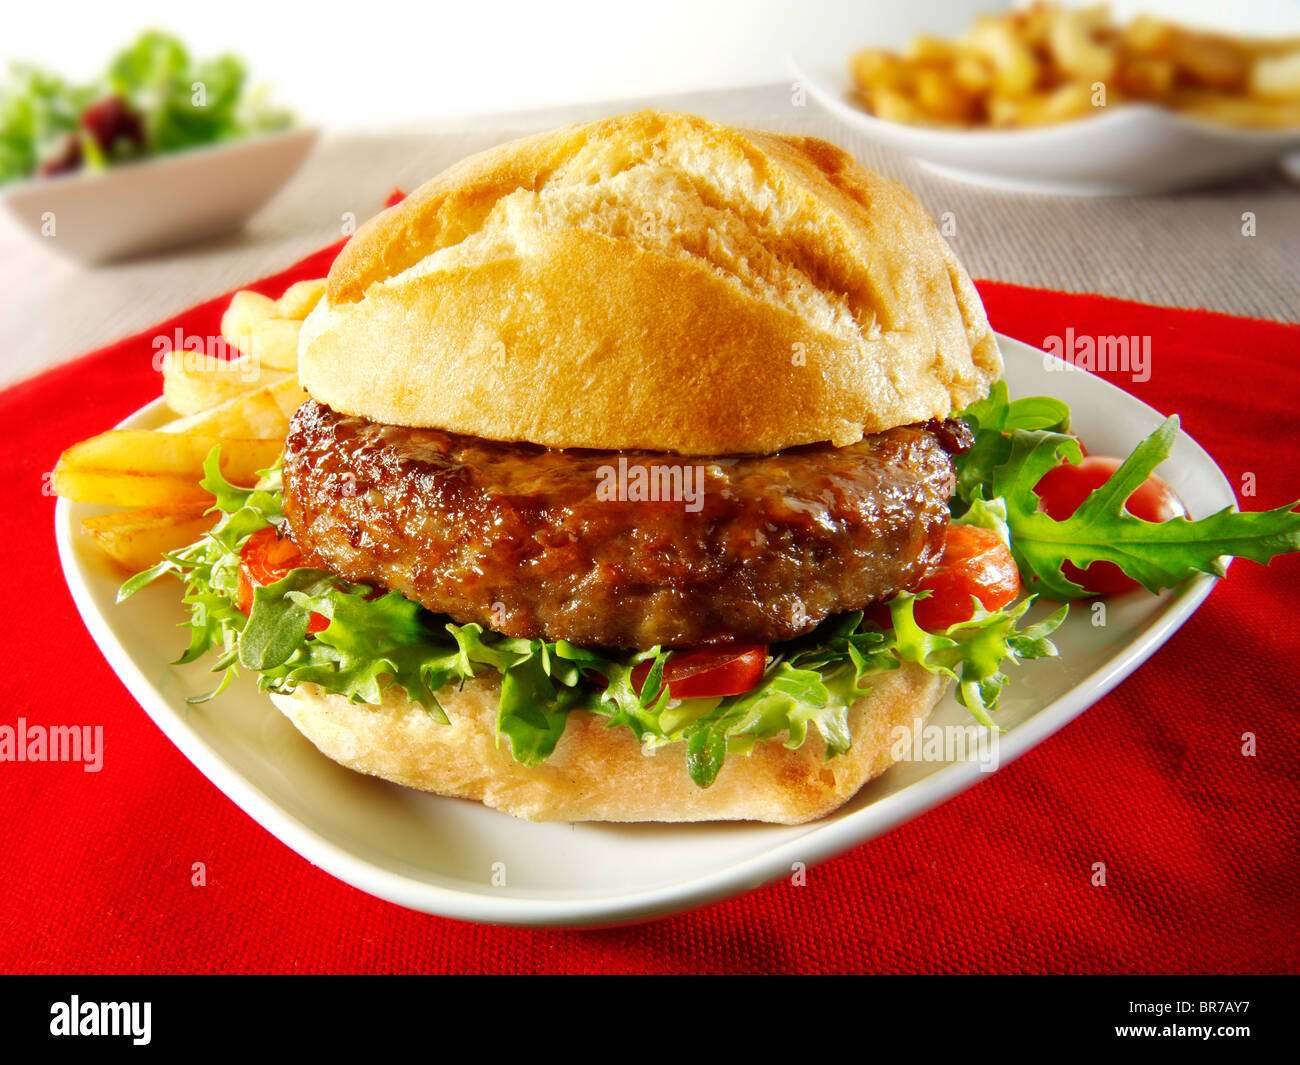 Beef burgers in a bread bun with salad & chips Stock Photo